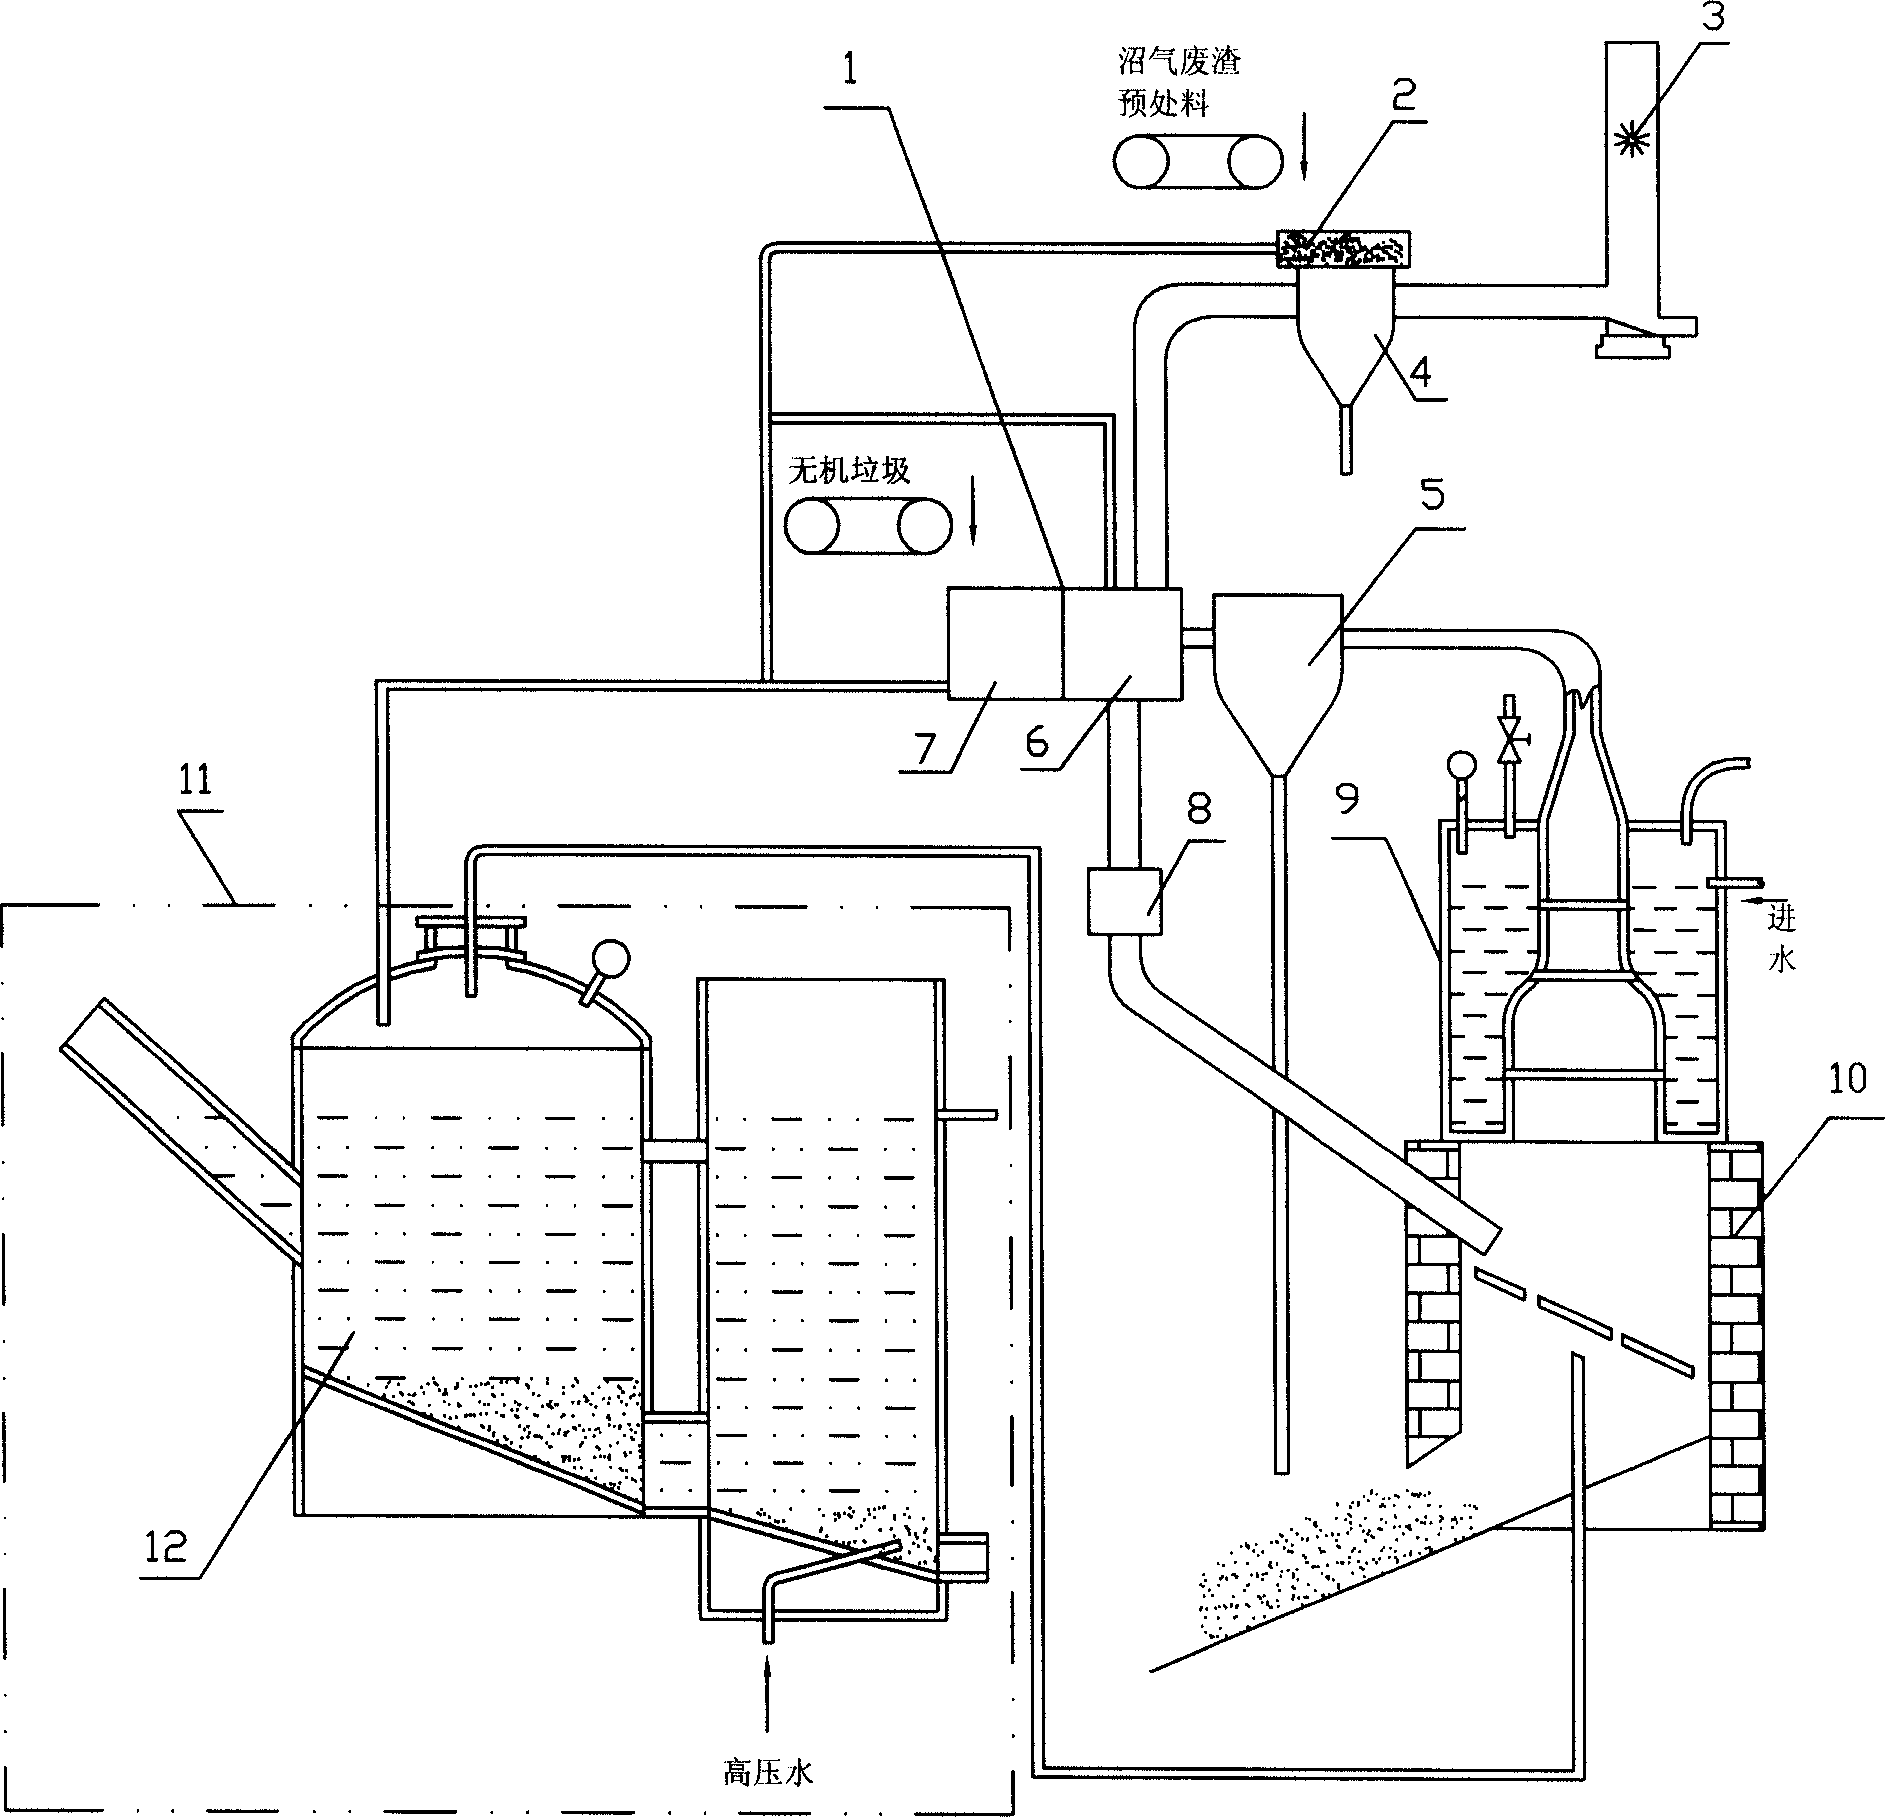 Method for treatment of urban garbage